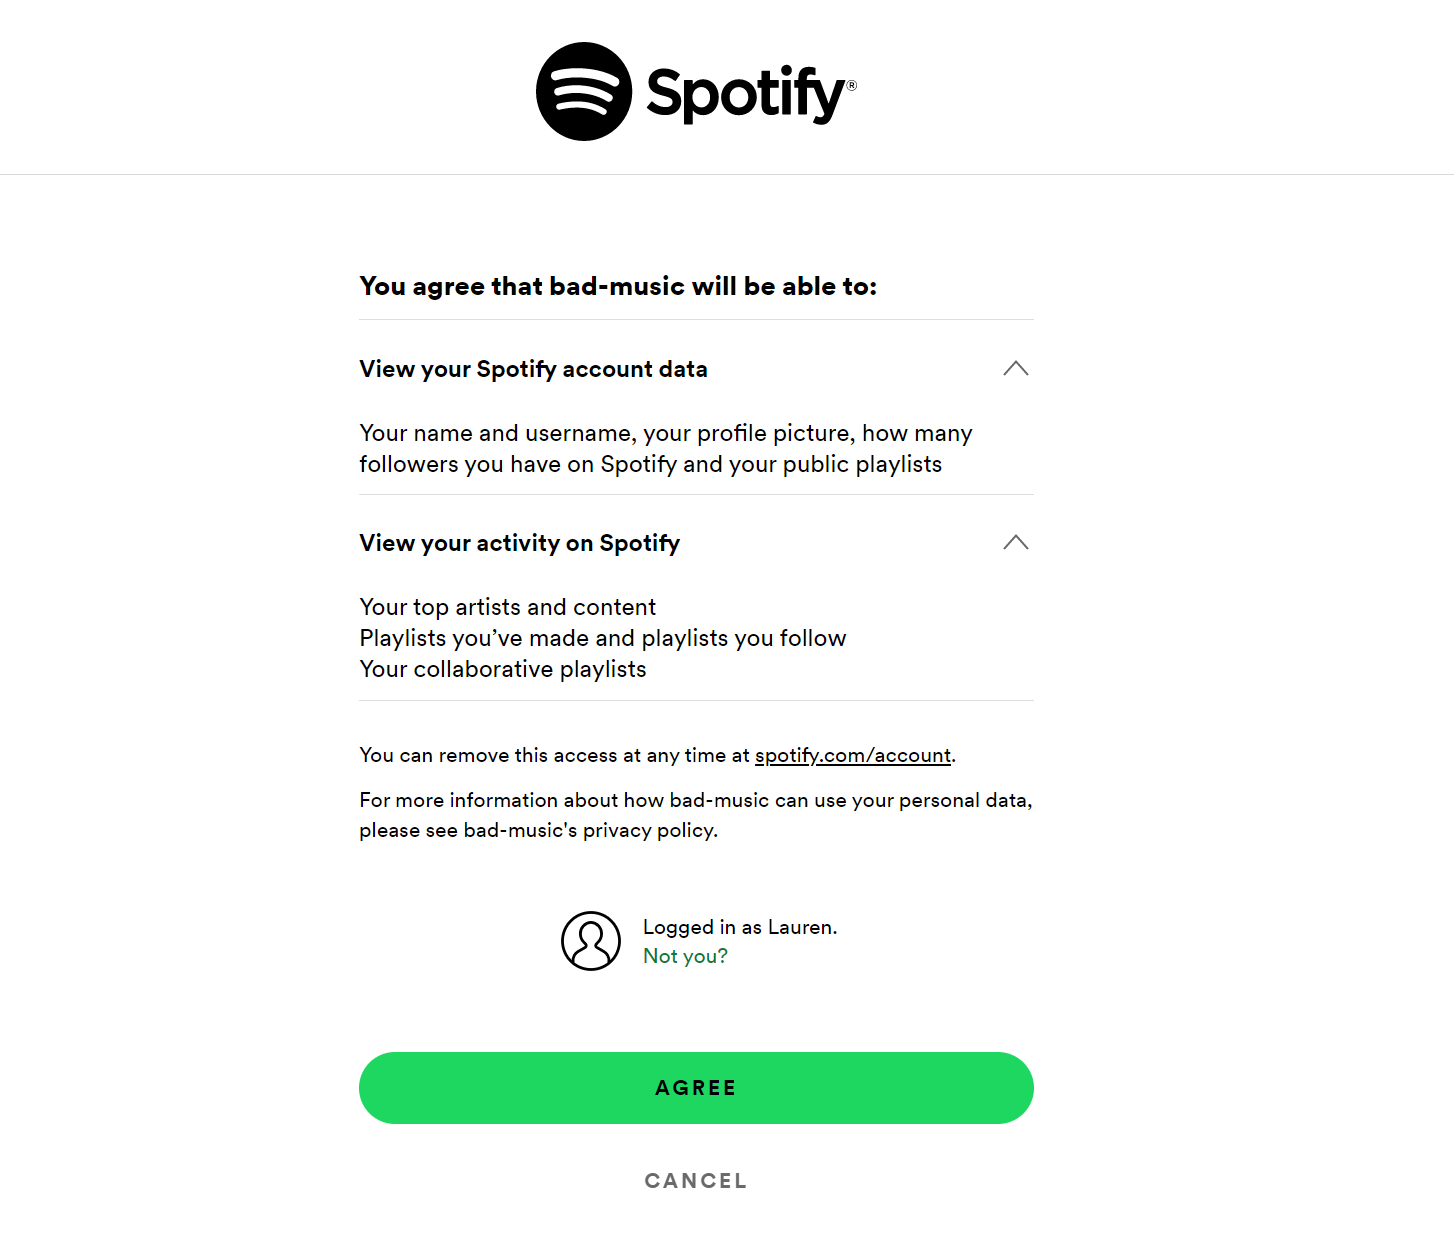 spotify data that gets shared